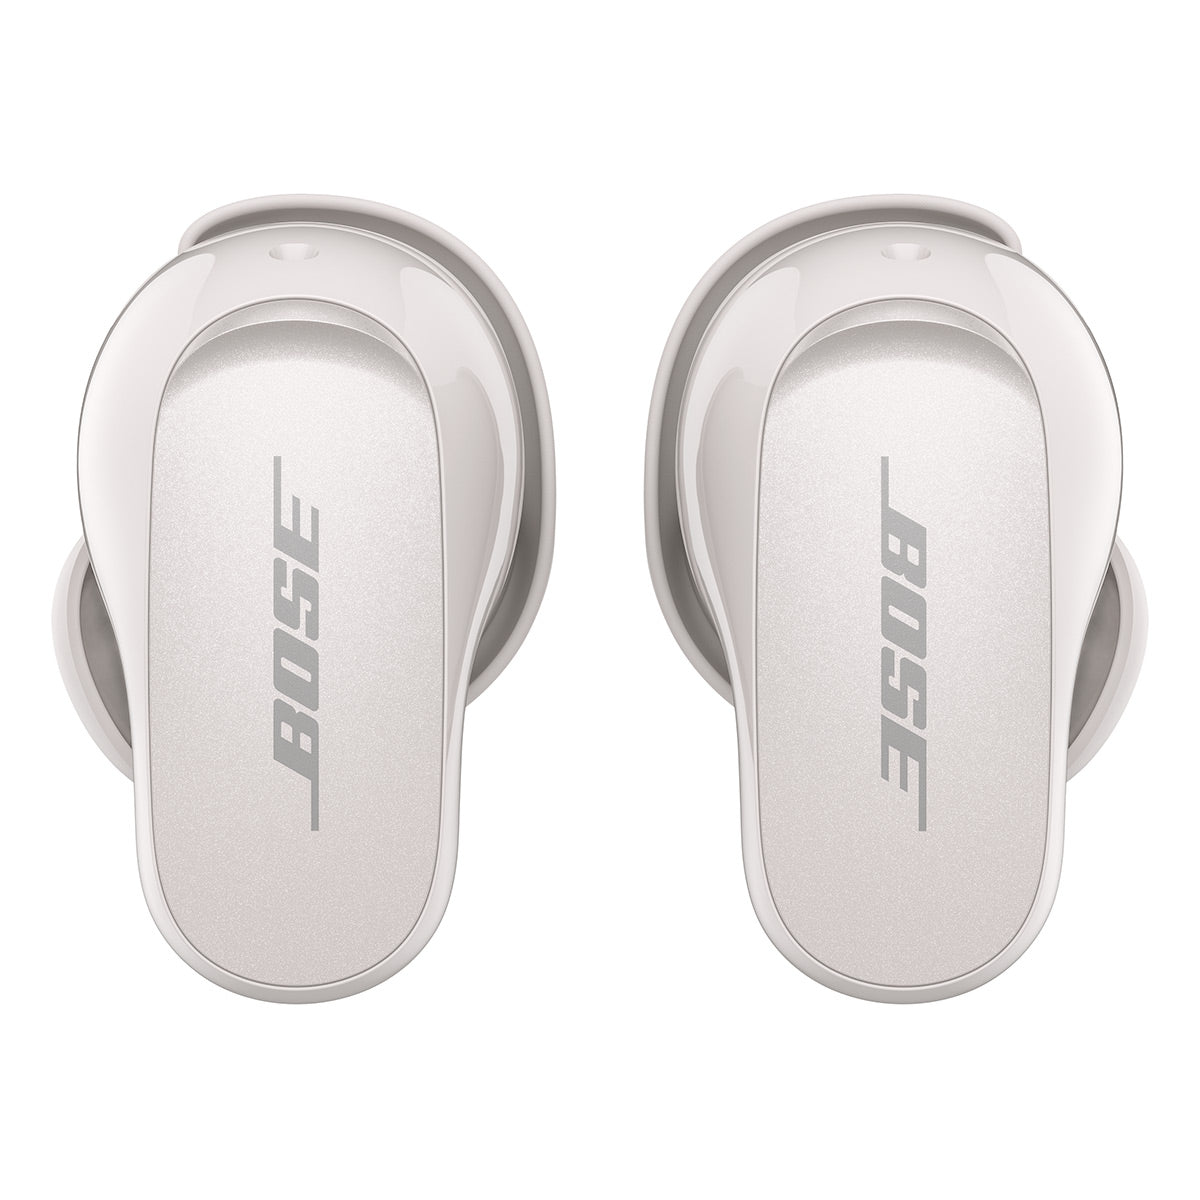 Bose QuietComfort Earbuds II True Wireless with Personalized Noise Cancellation (Soapstone) and Bose SoundLink Flex Bluetooth Portable Speaker (White Smoke)